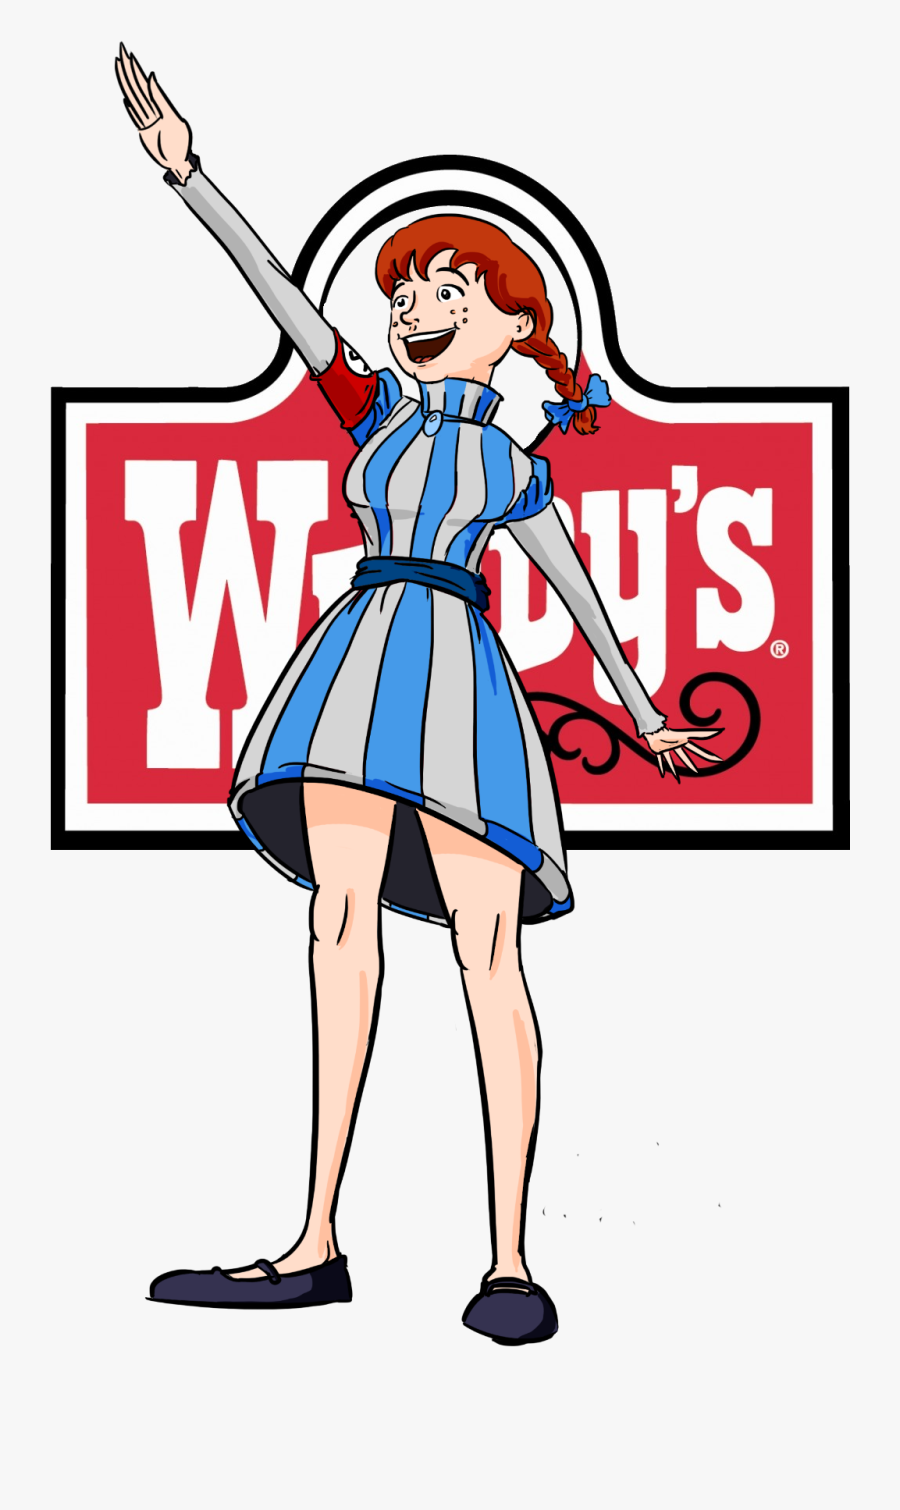 Wendy - Wendy's Company, Transparent Clipart